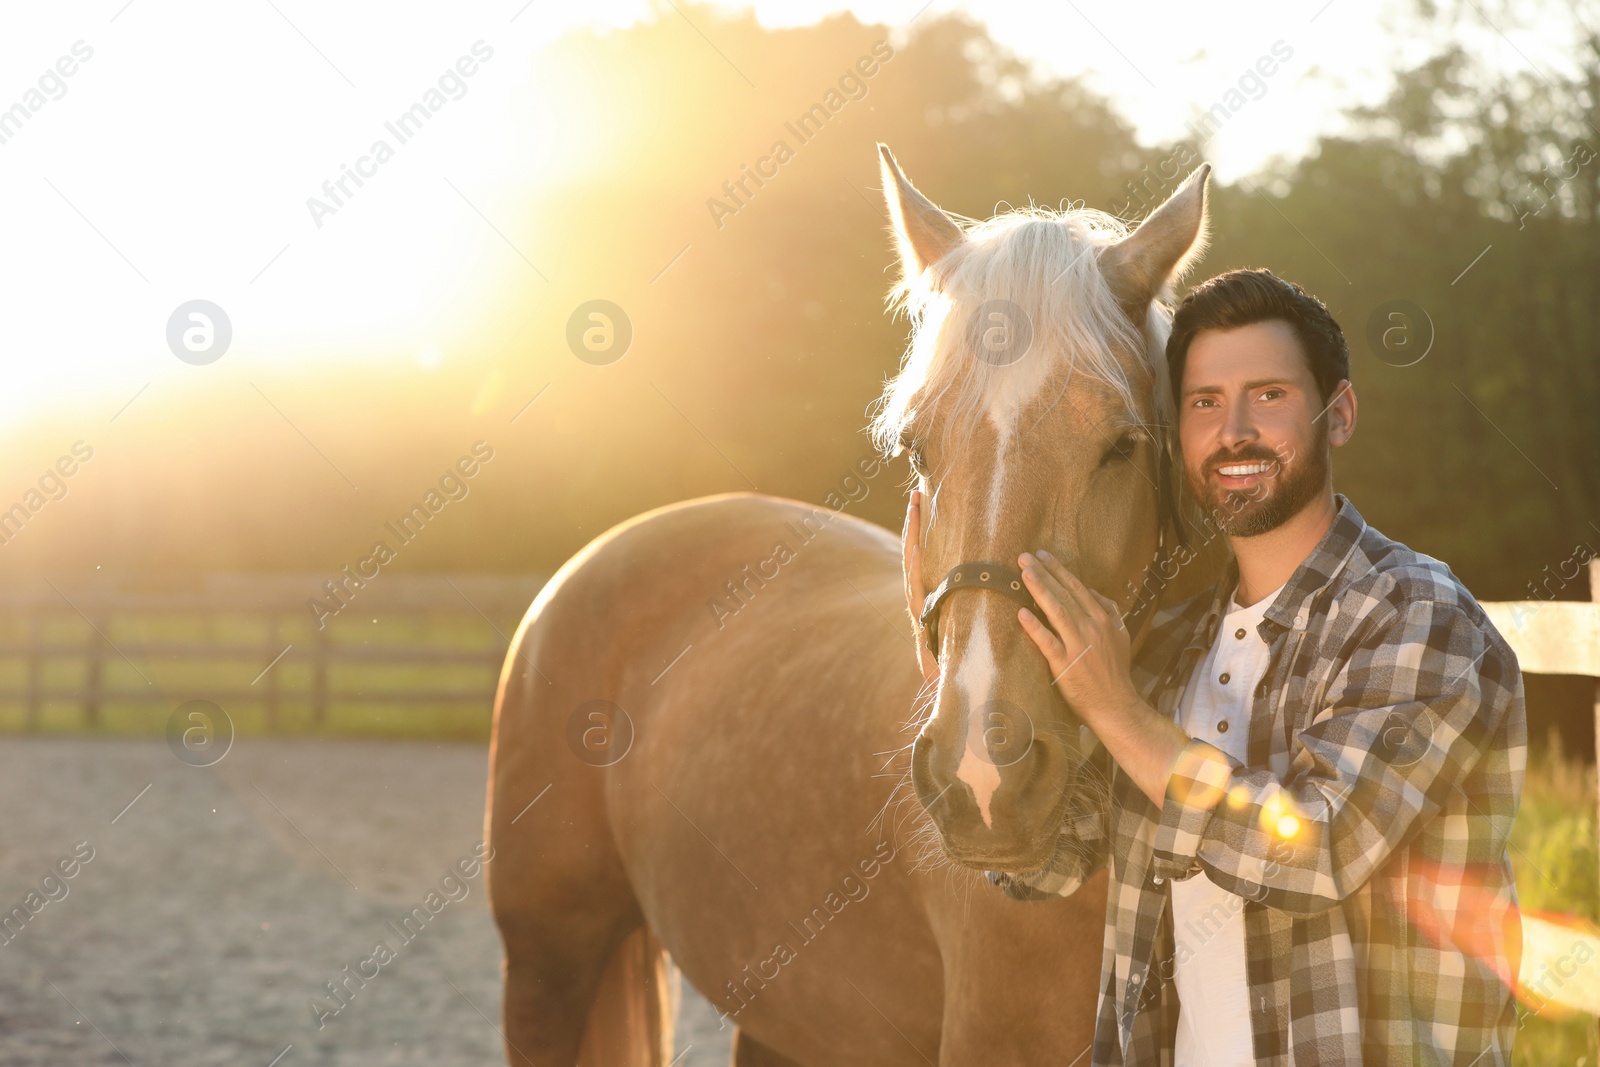 Photo of Man with adorable horse outdoors on sunny day. Lovely domesticated pet